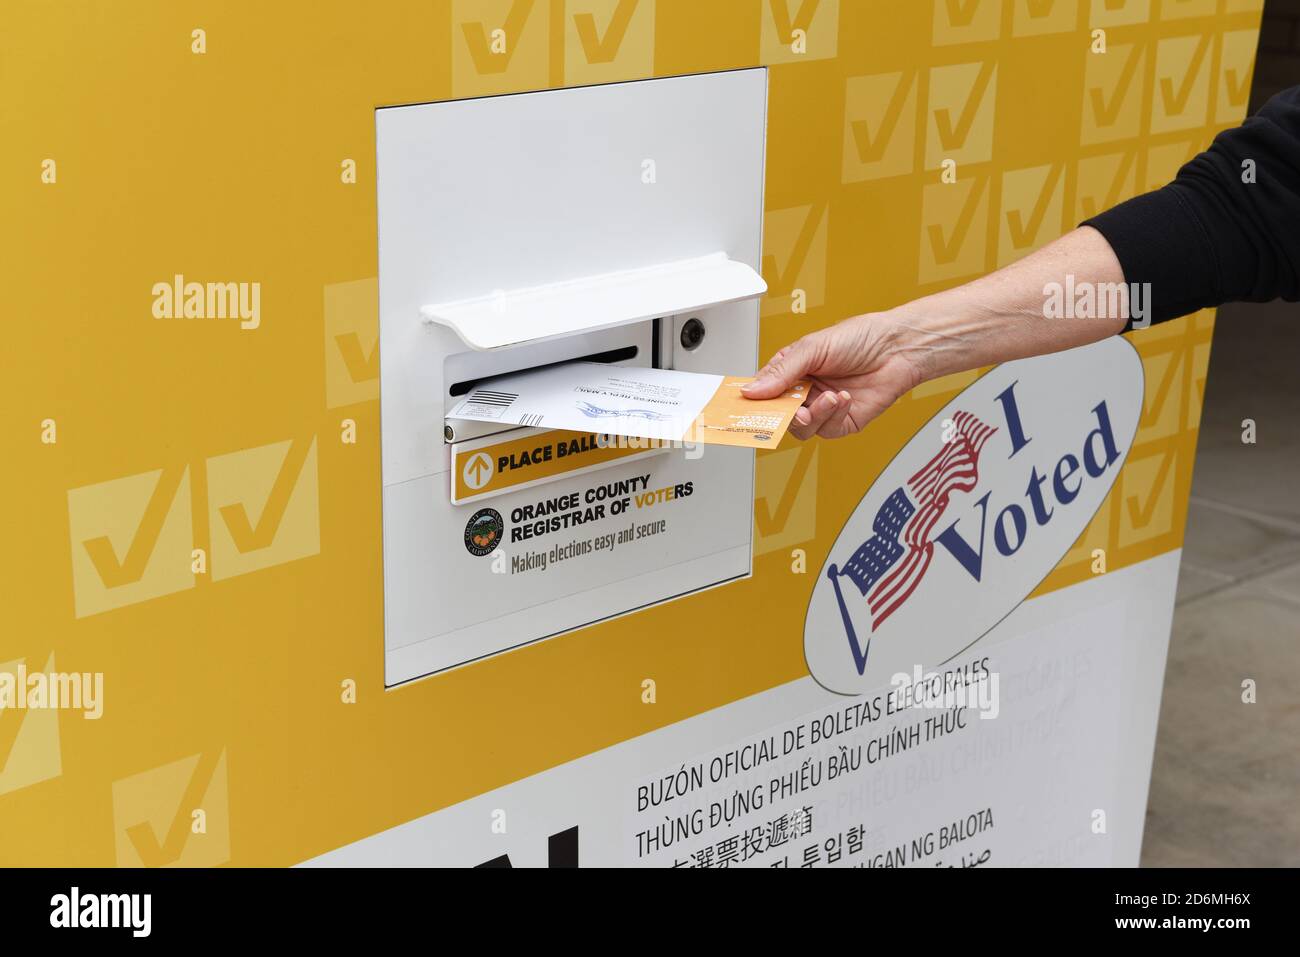 IRVINE, CALIFORNIA - 18 OCT 2020: Woman placing mail in ballot in an Official Ballot Drop Box at a public park, Irvine, Orange County, California. Stock Photo